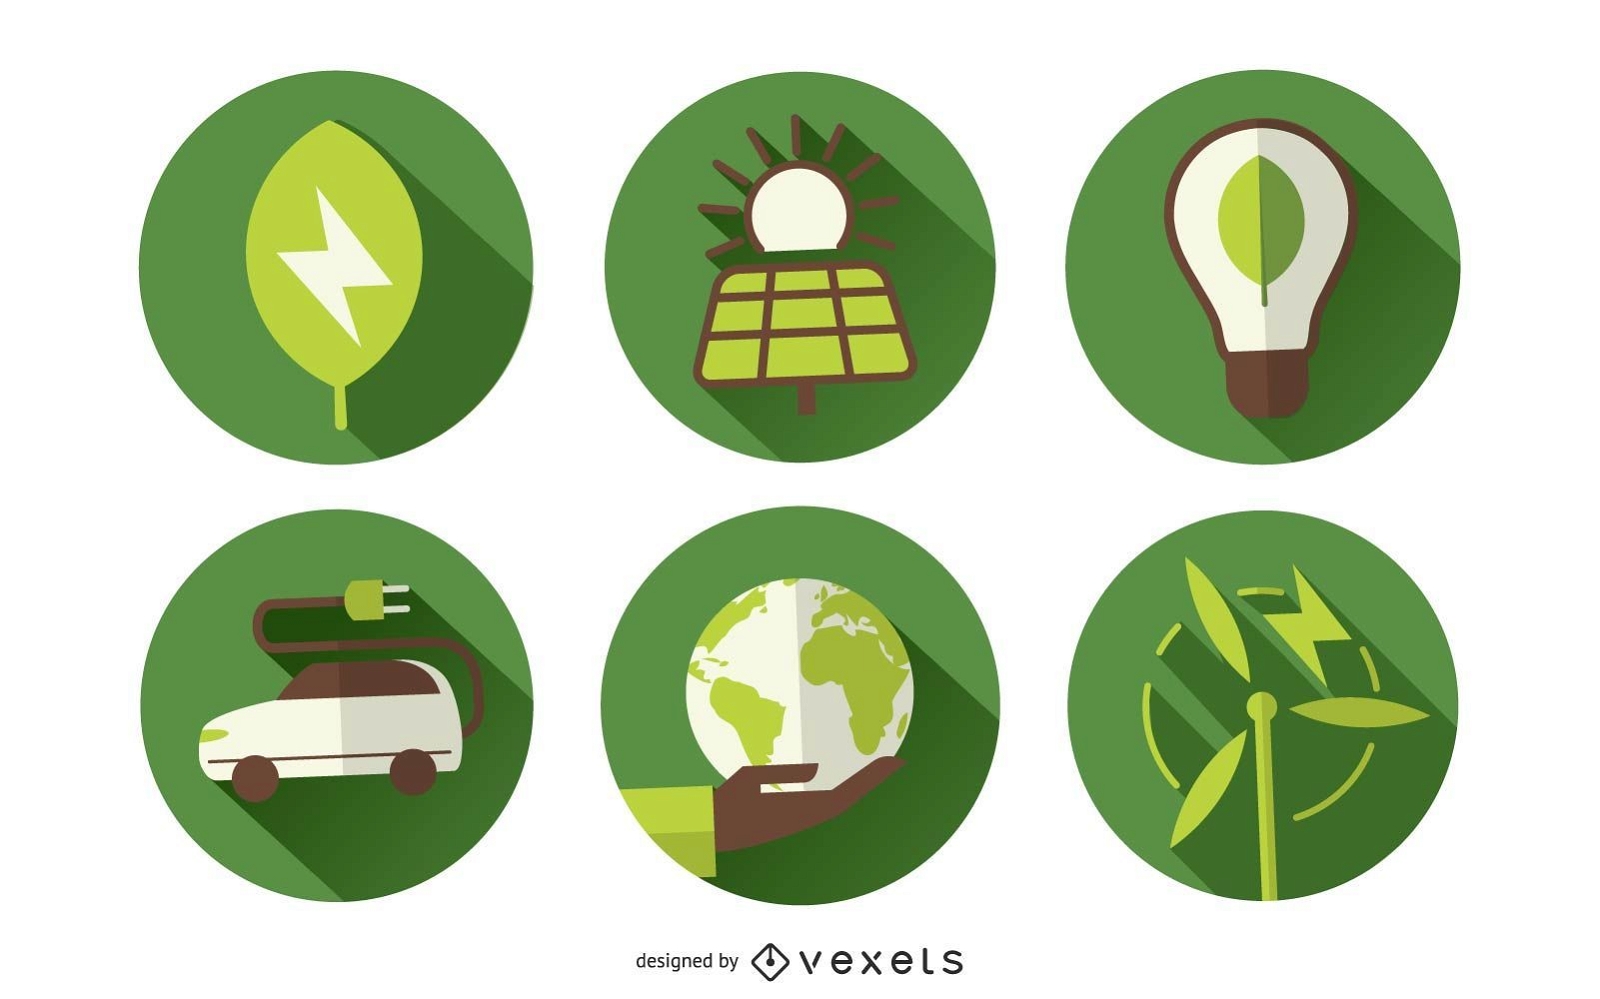 3D ecology icons and labels